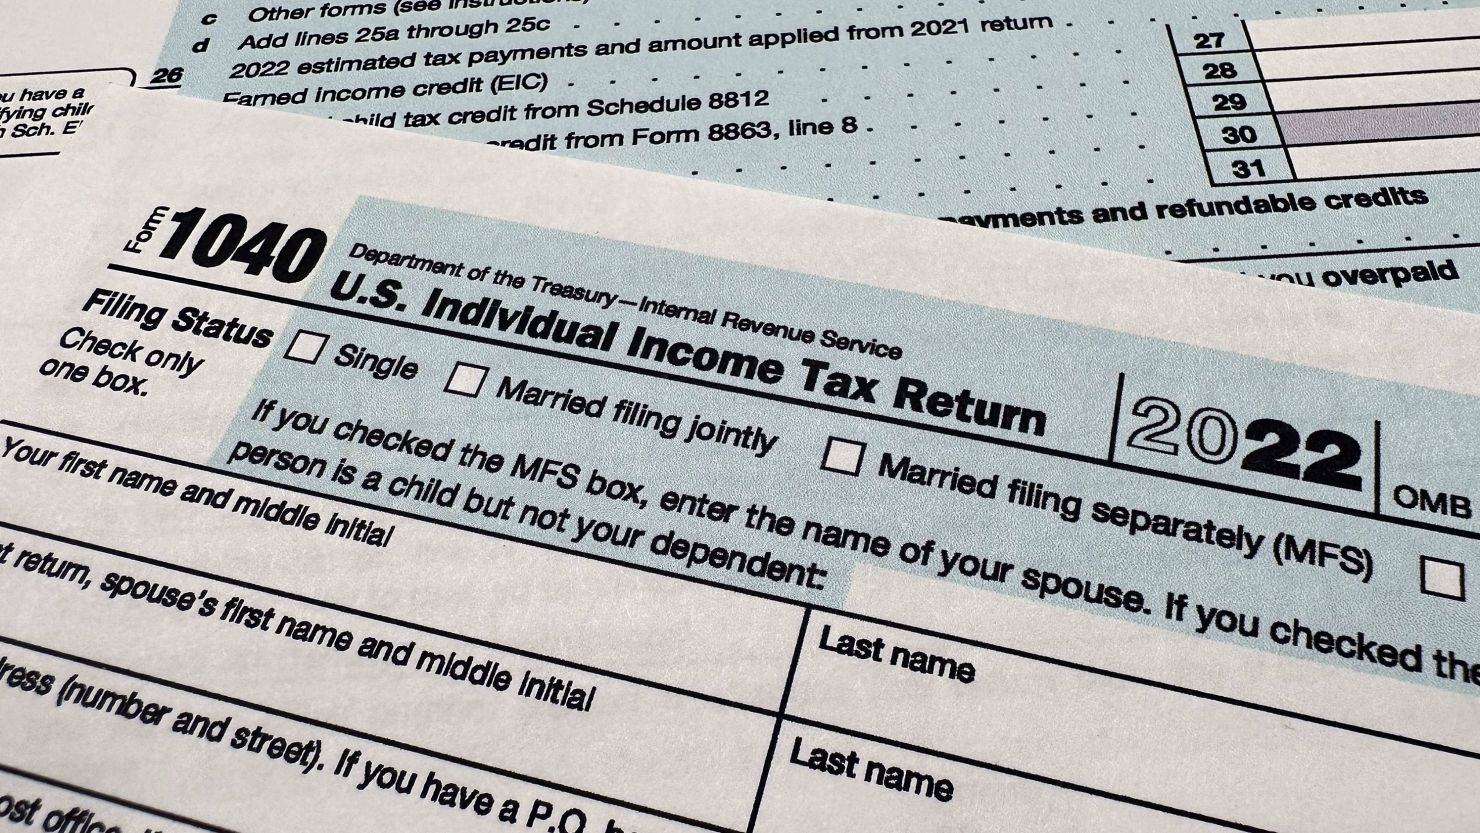 The Internal Revenue Service 1040 tax form for 2022